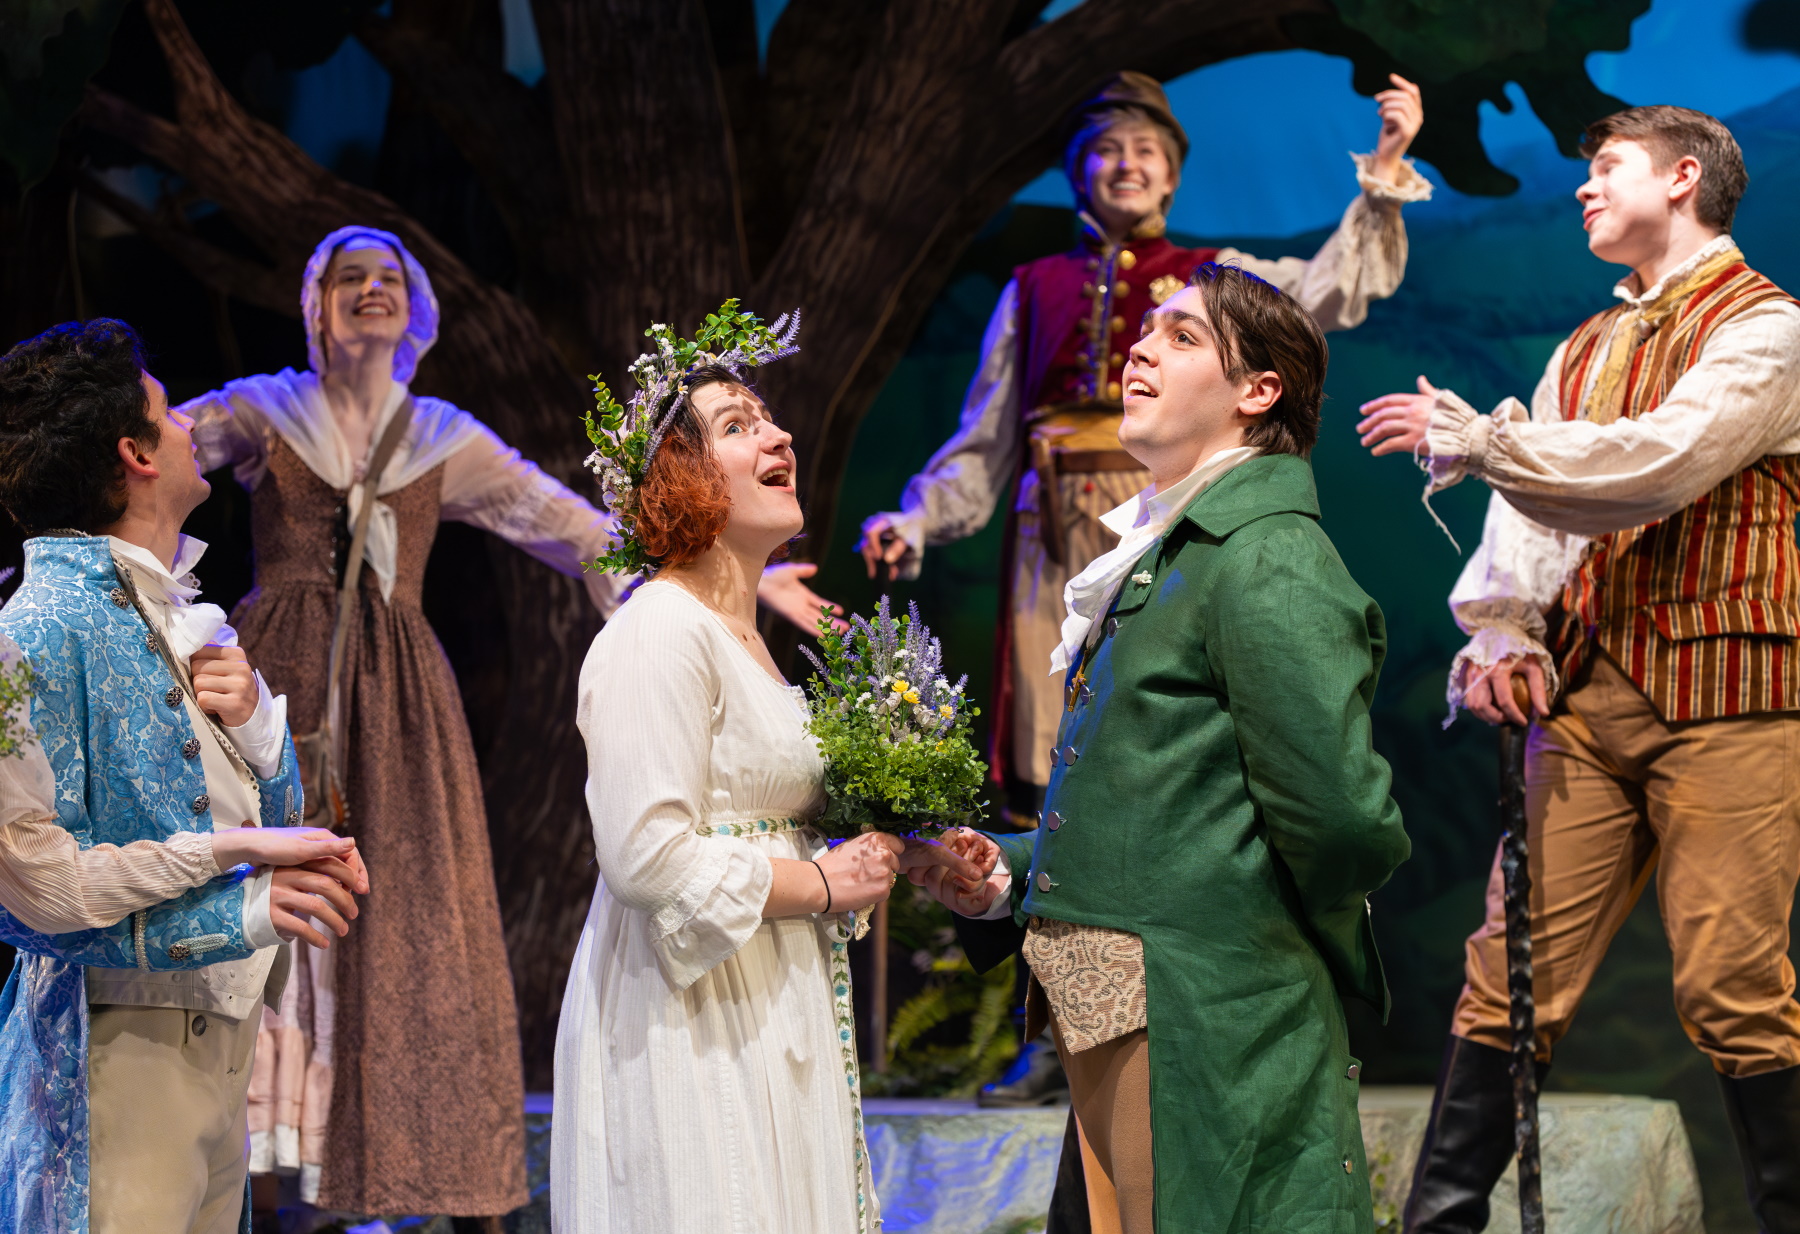 Seniors Maddie Guest and Jon Winkler take center stage in a scene from "As You Like It."